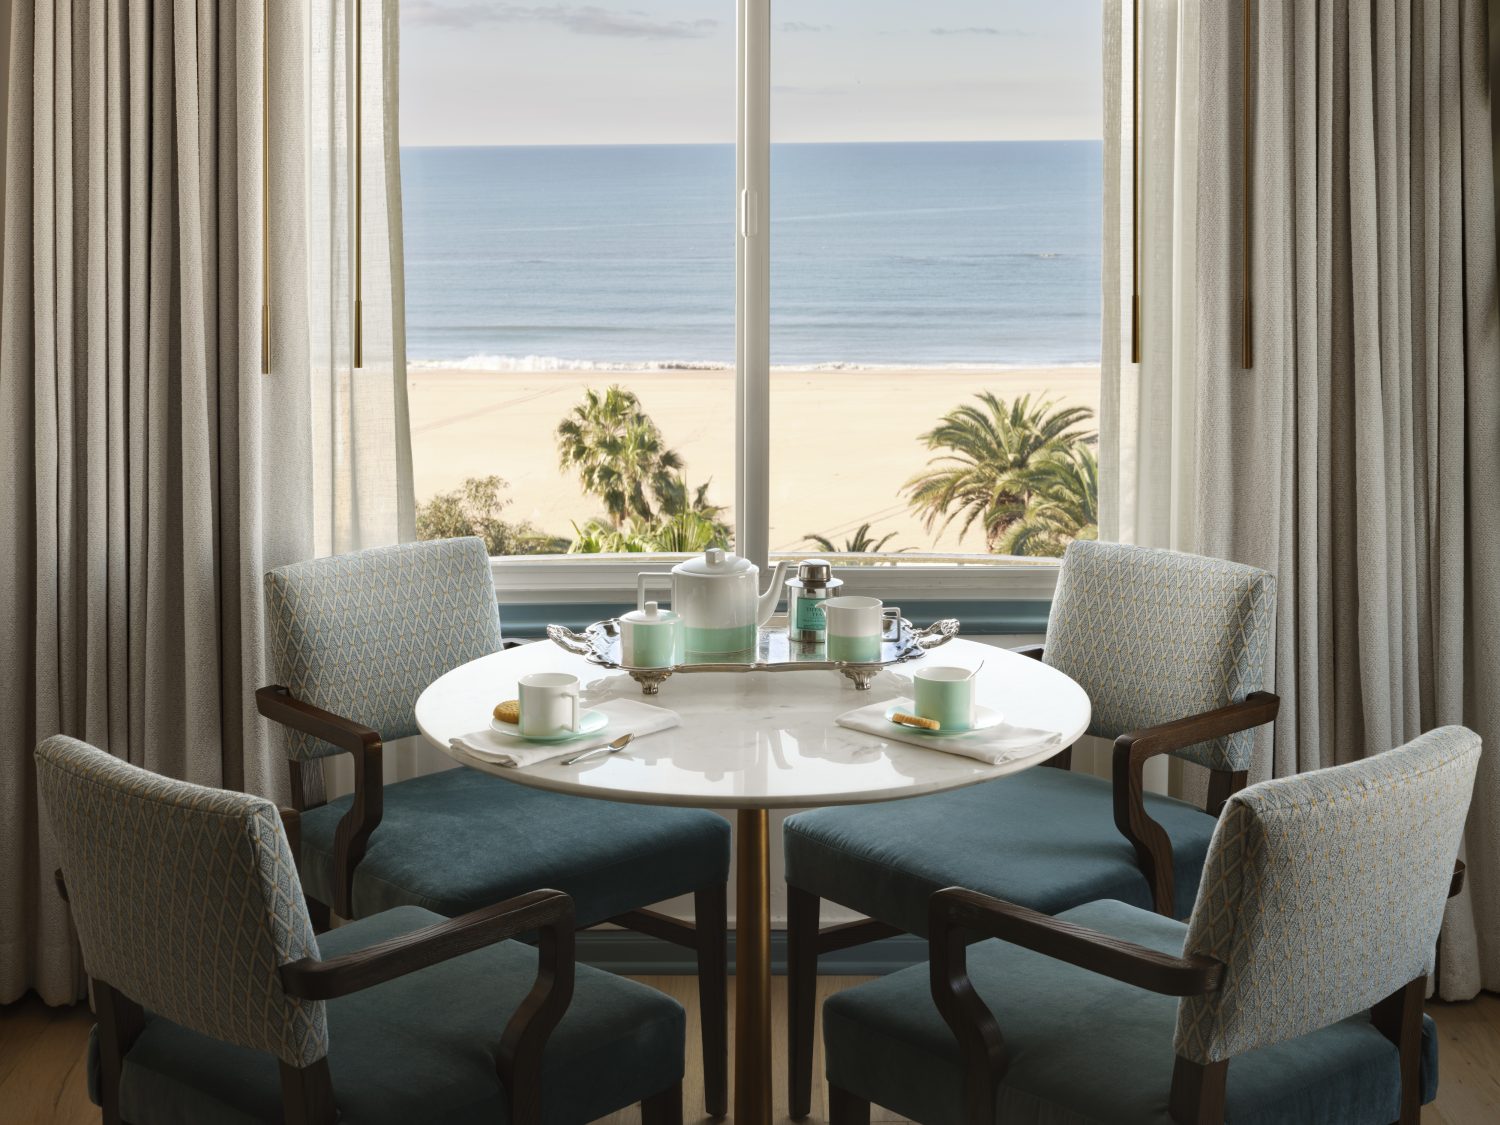 white chairs surrounding table, blue tea set, window with view of beach